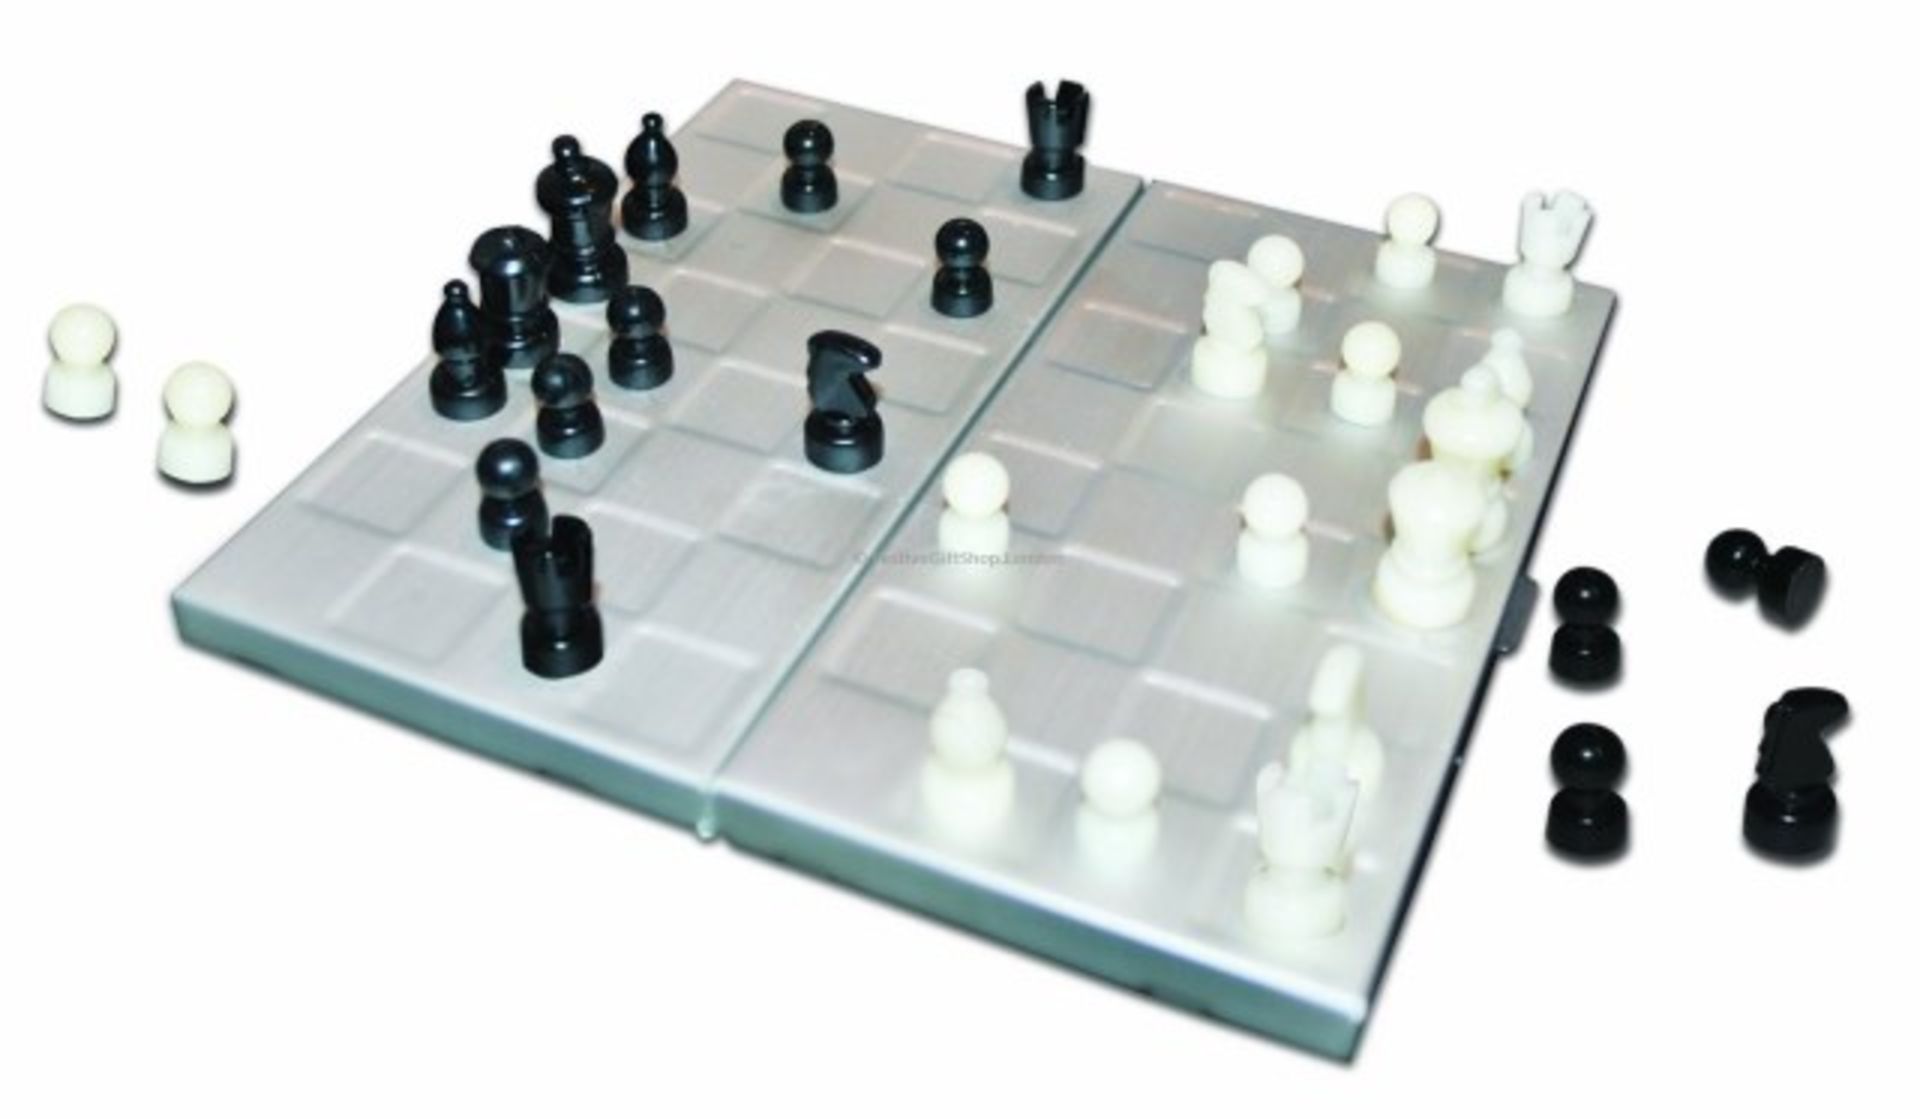 V *TRADE QTY* Brand New Magnetic Chess Set In Aluminium case X 10 YOUR BID PRICE TO BE MULTIPLIED BY